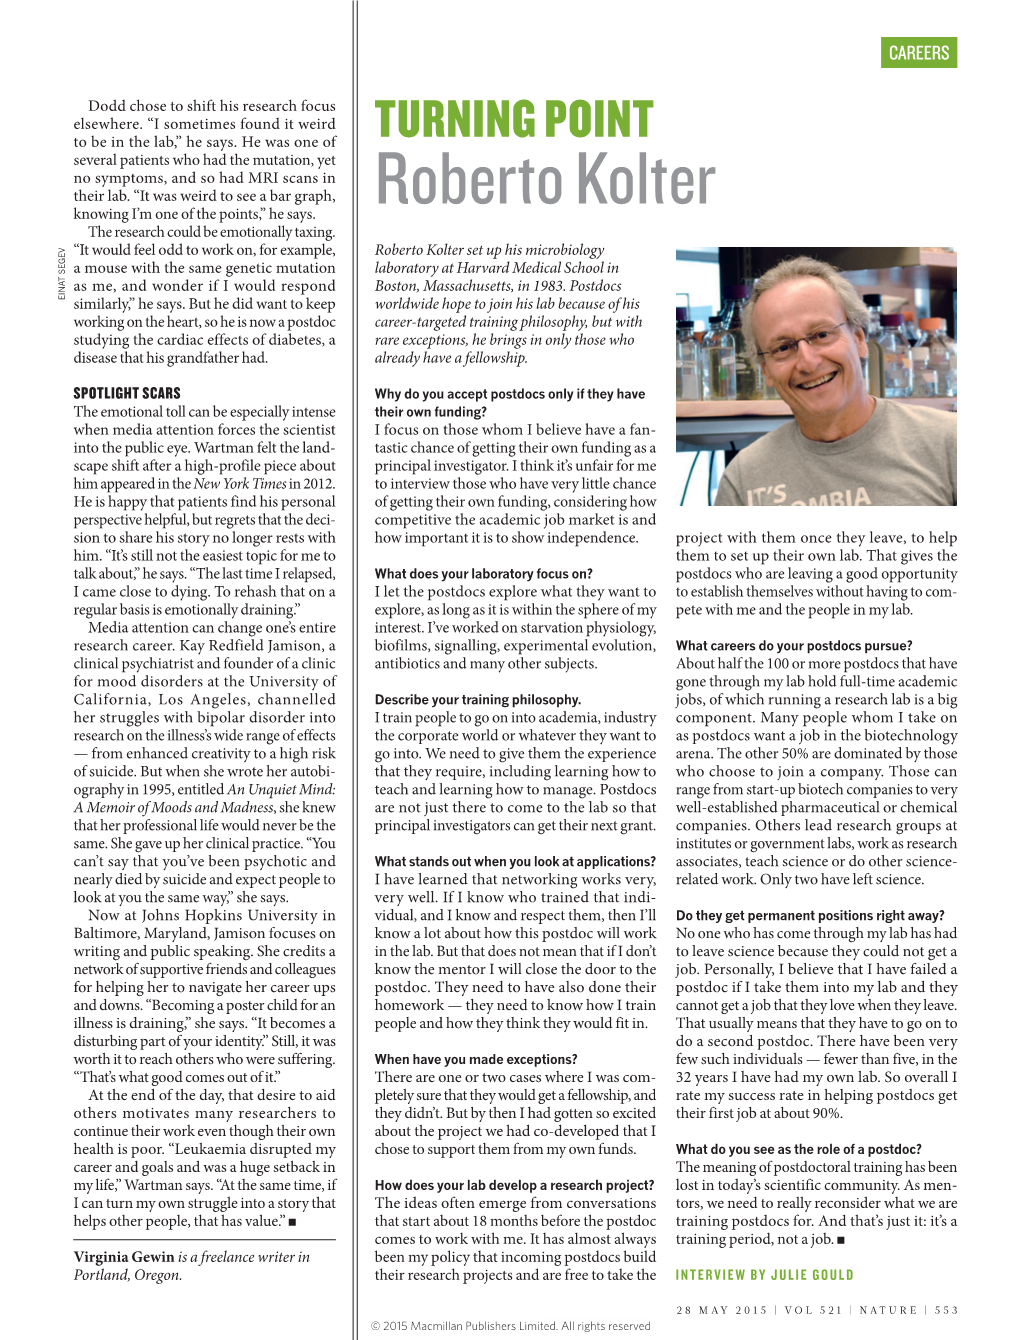 Roberto Kolter Knowing I’M One of the Points,” He Says